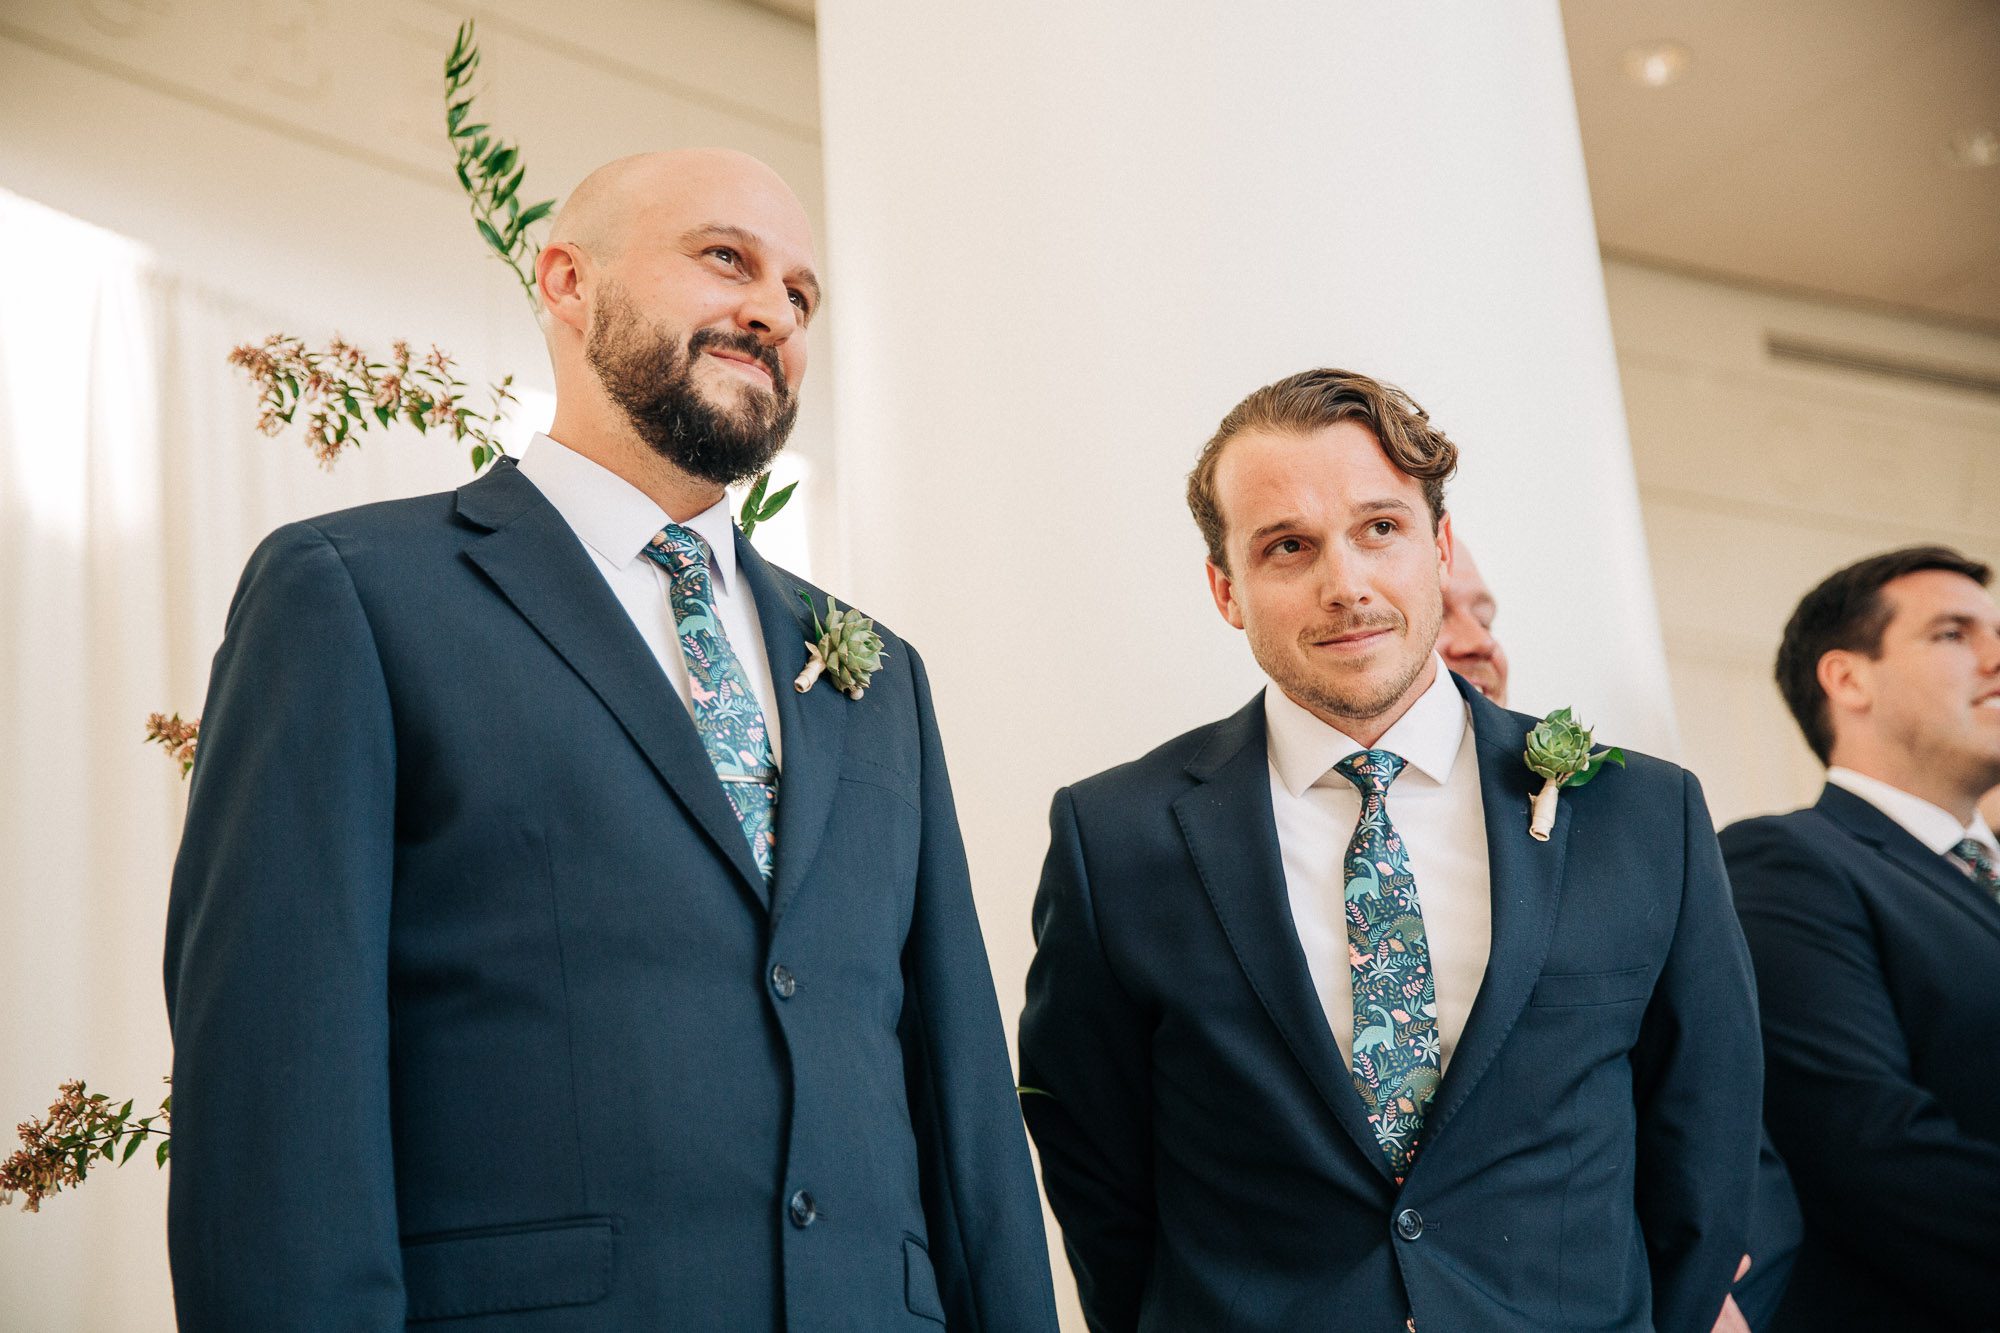 A photo of the groom and the best man as they watch the bride walk down the aisle